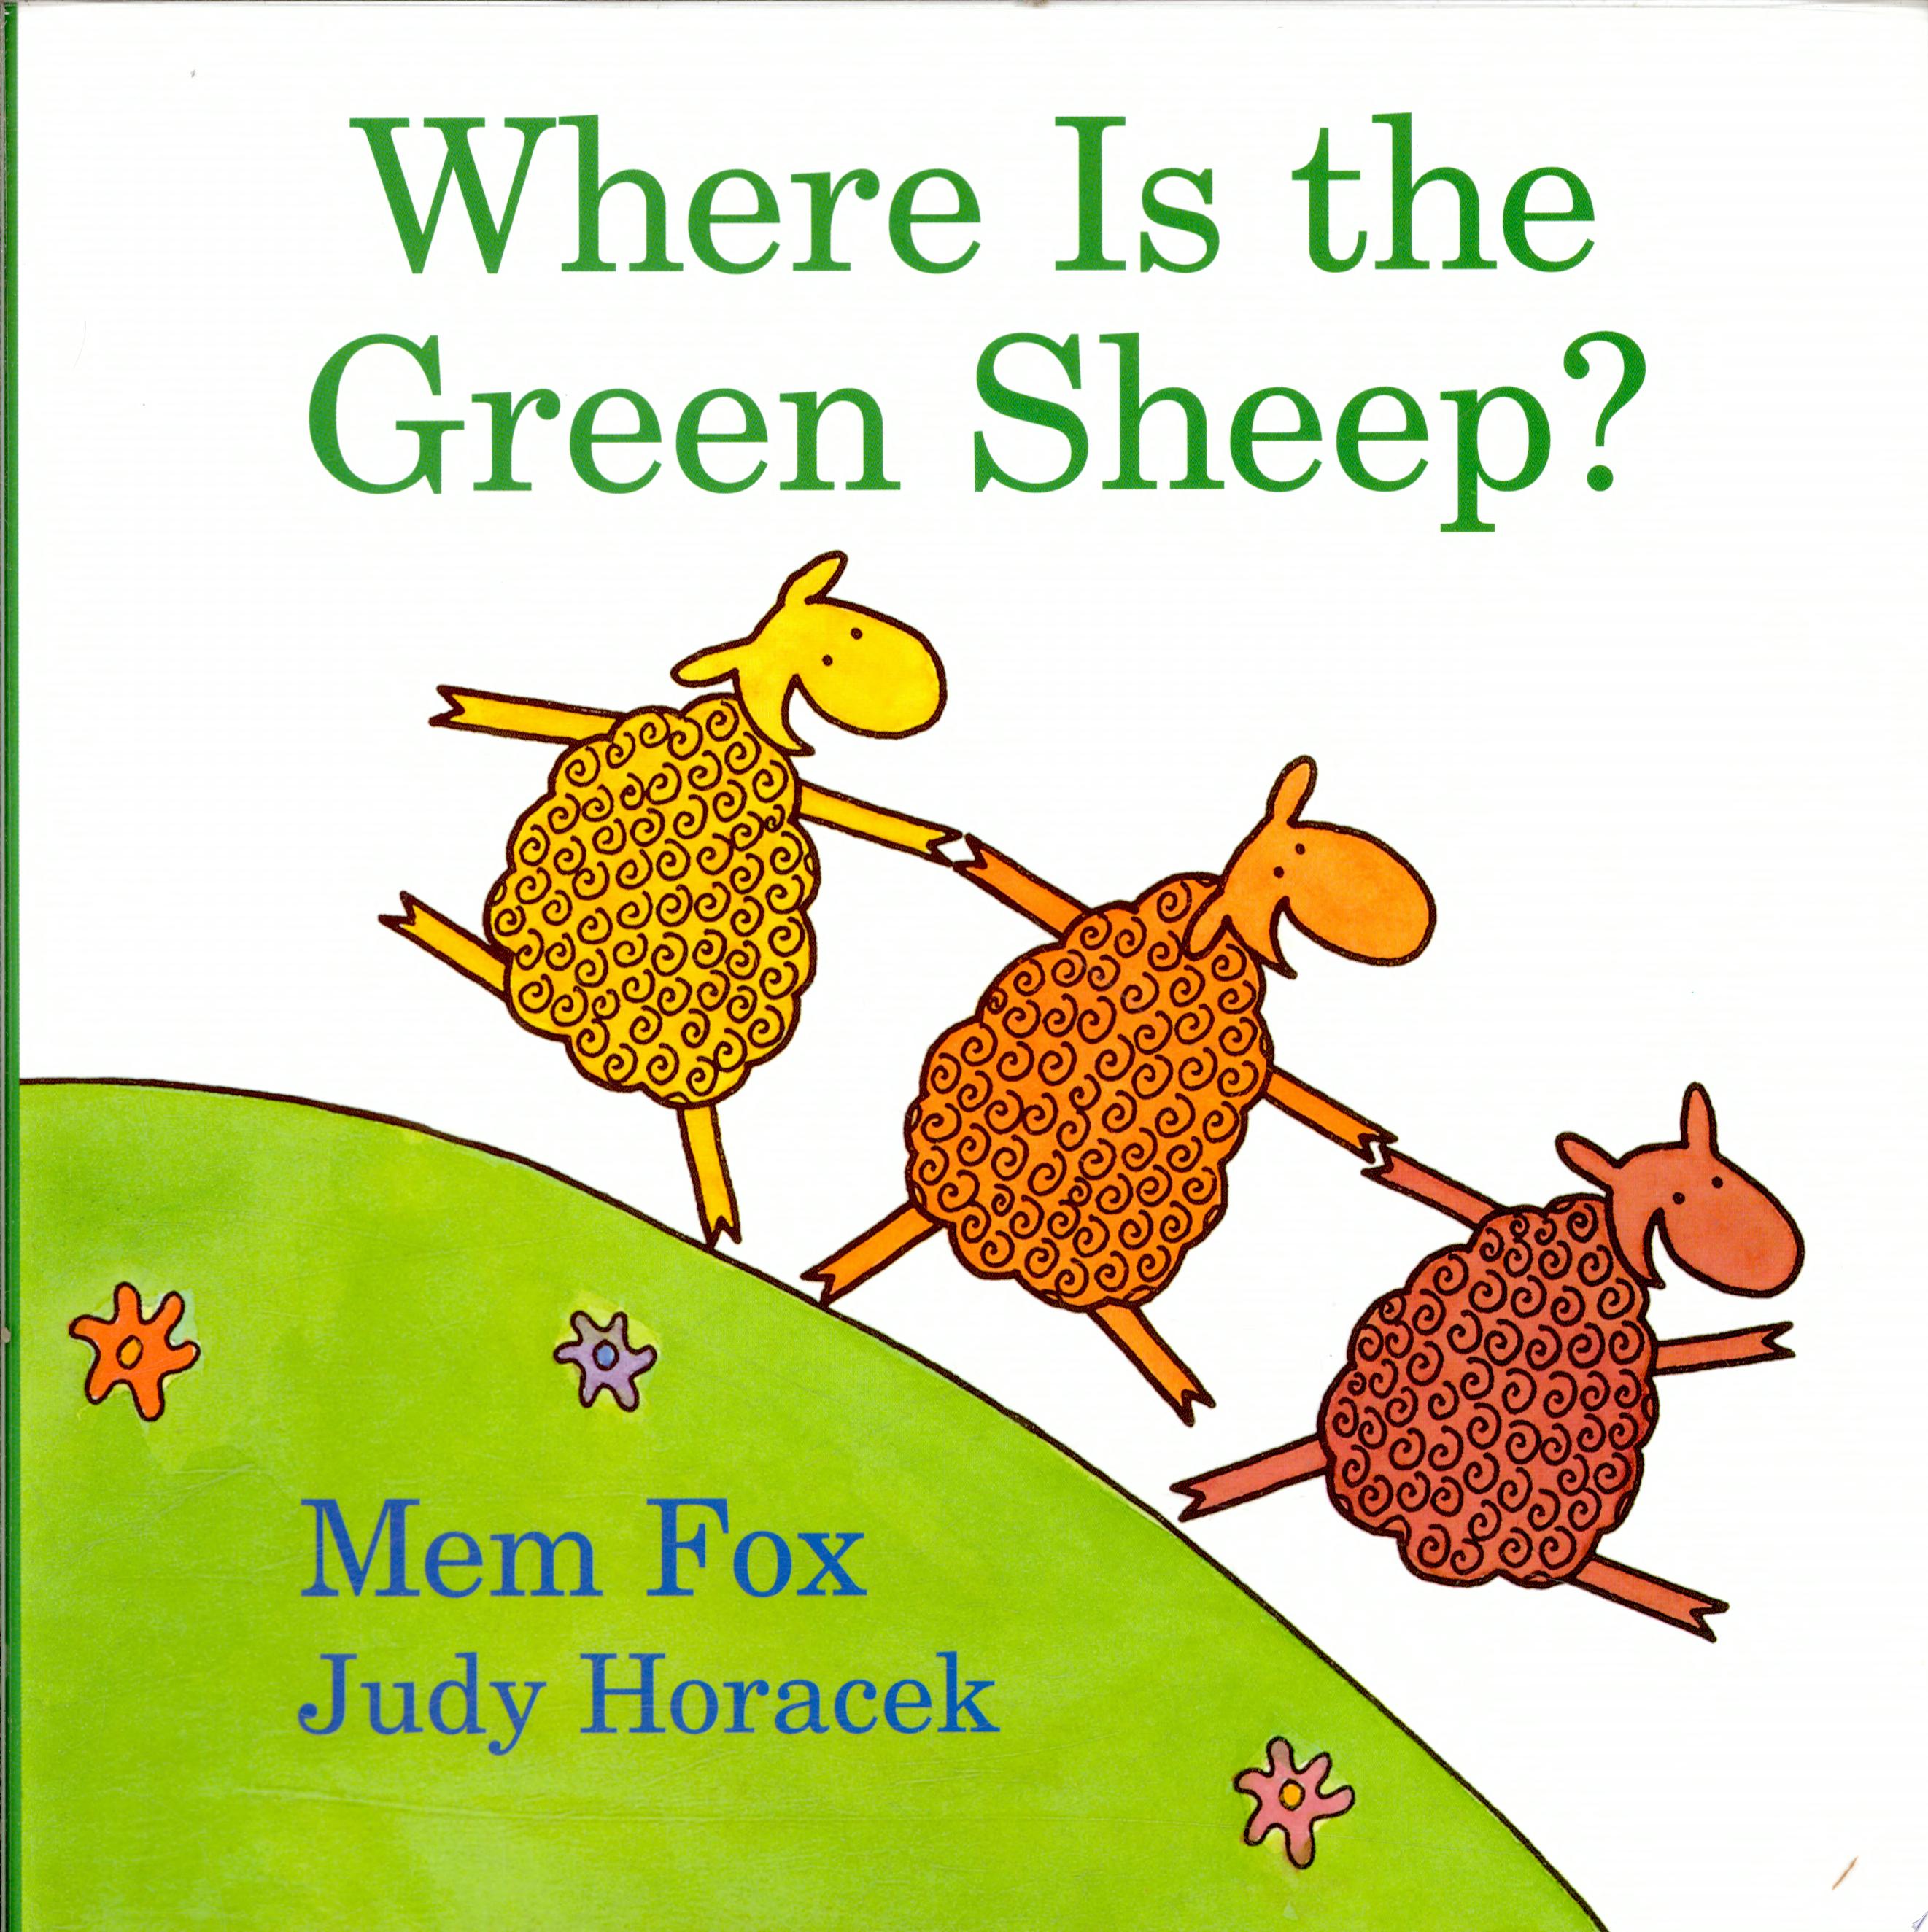 Image for "Where is the Green Sheep?"